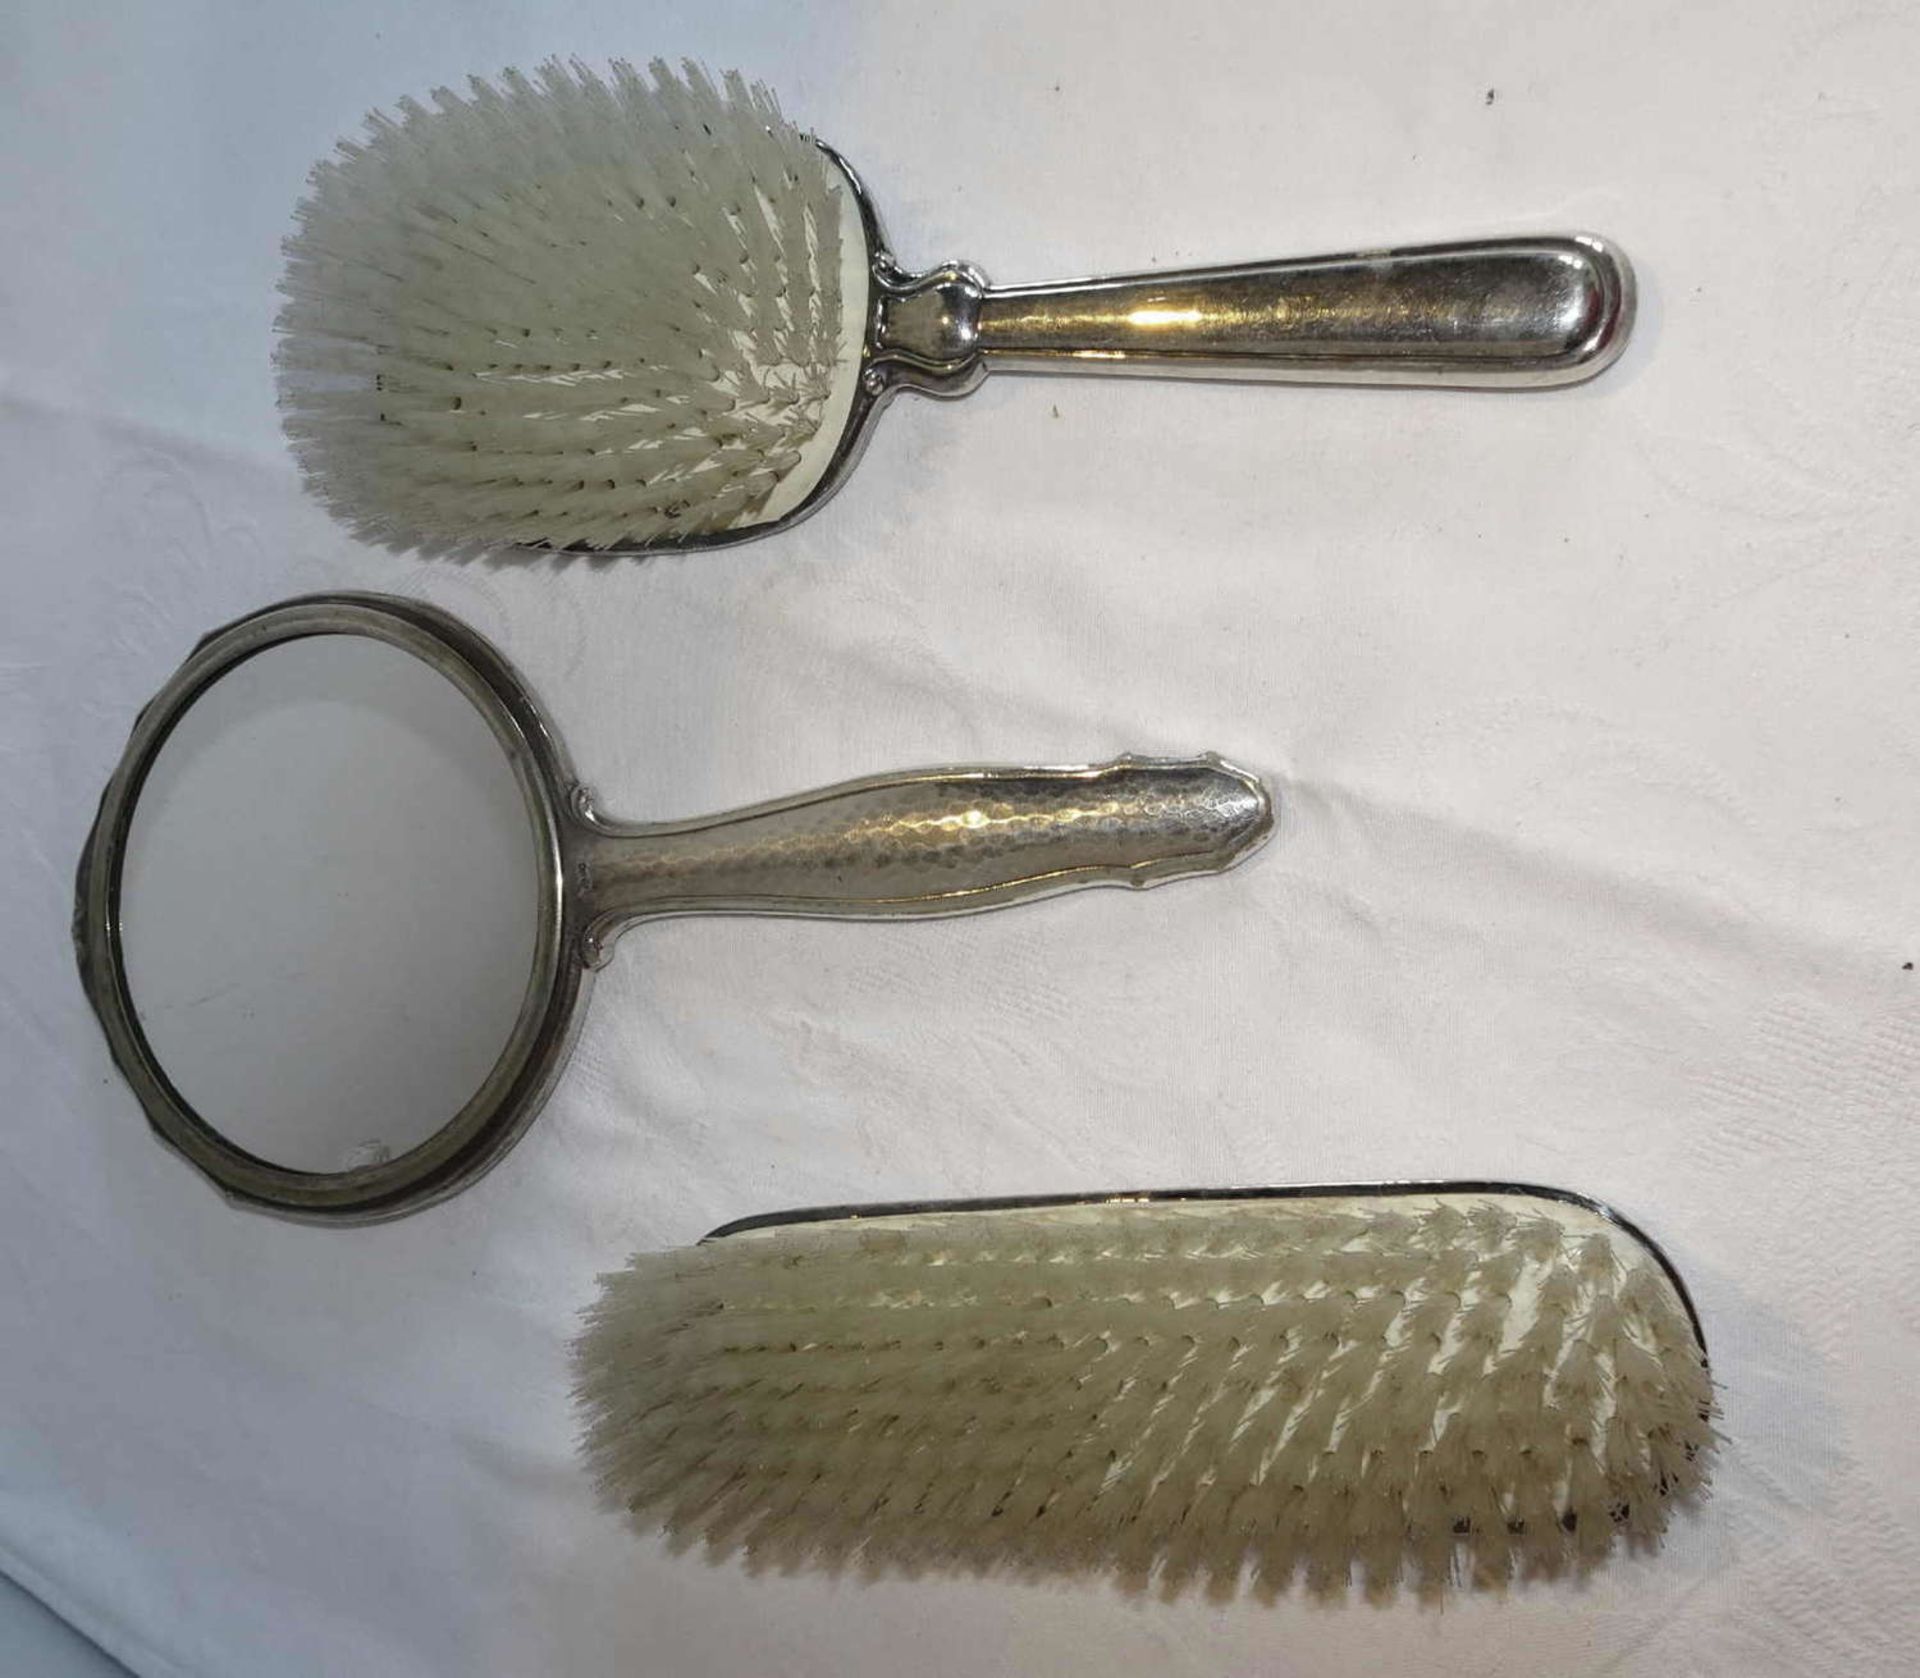 Hairdressing set - silver, 3 pieces. - Image 2 of 3